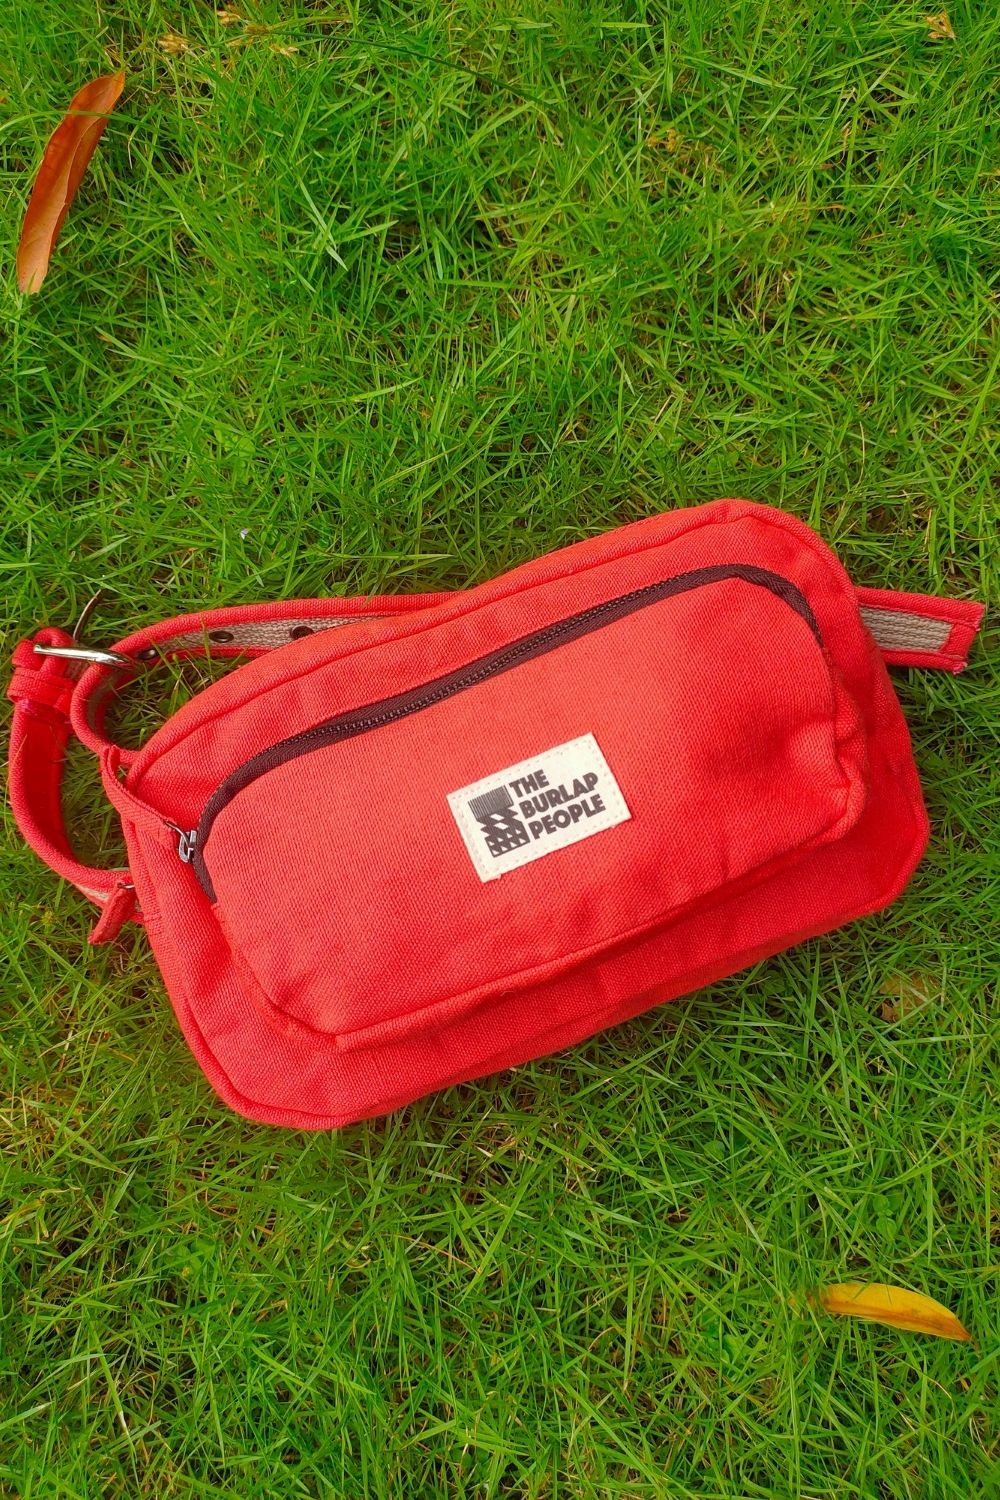 The Travel Light Pack Apparel & Accessories The Burlap People Tomato Red 